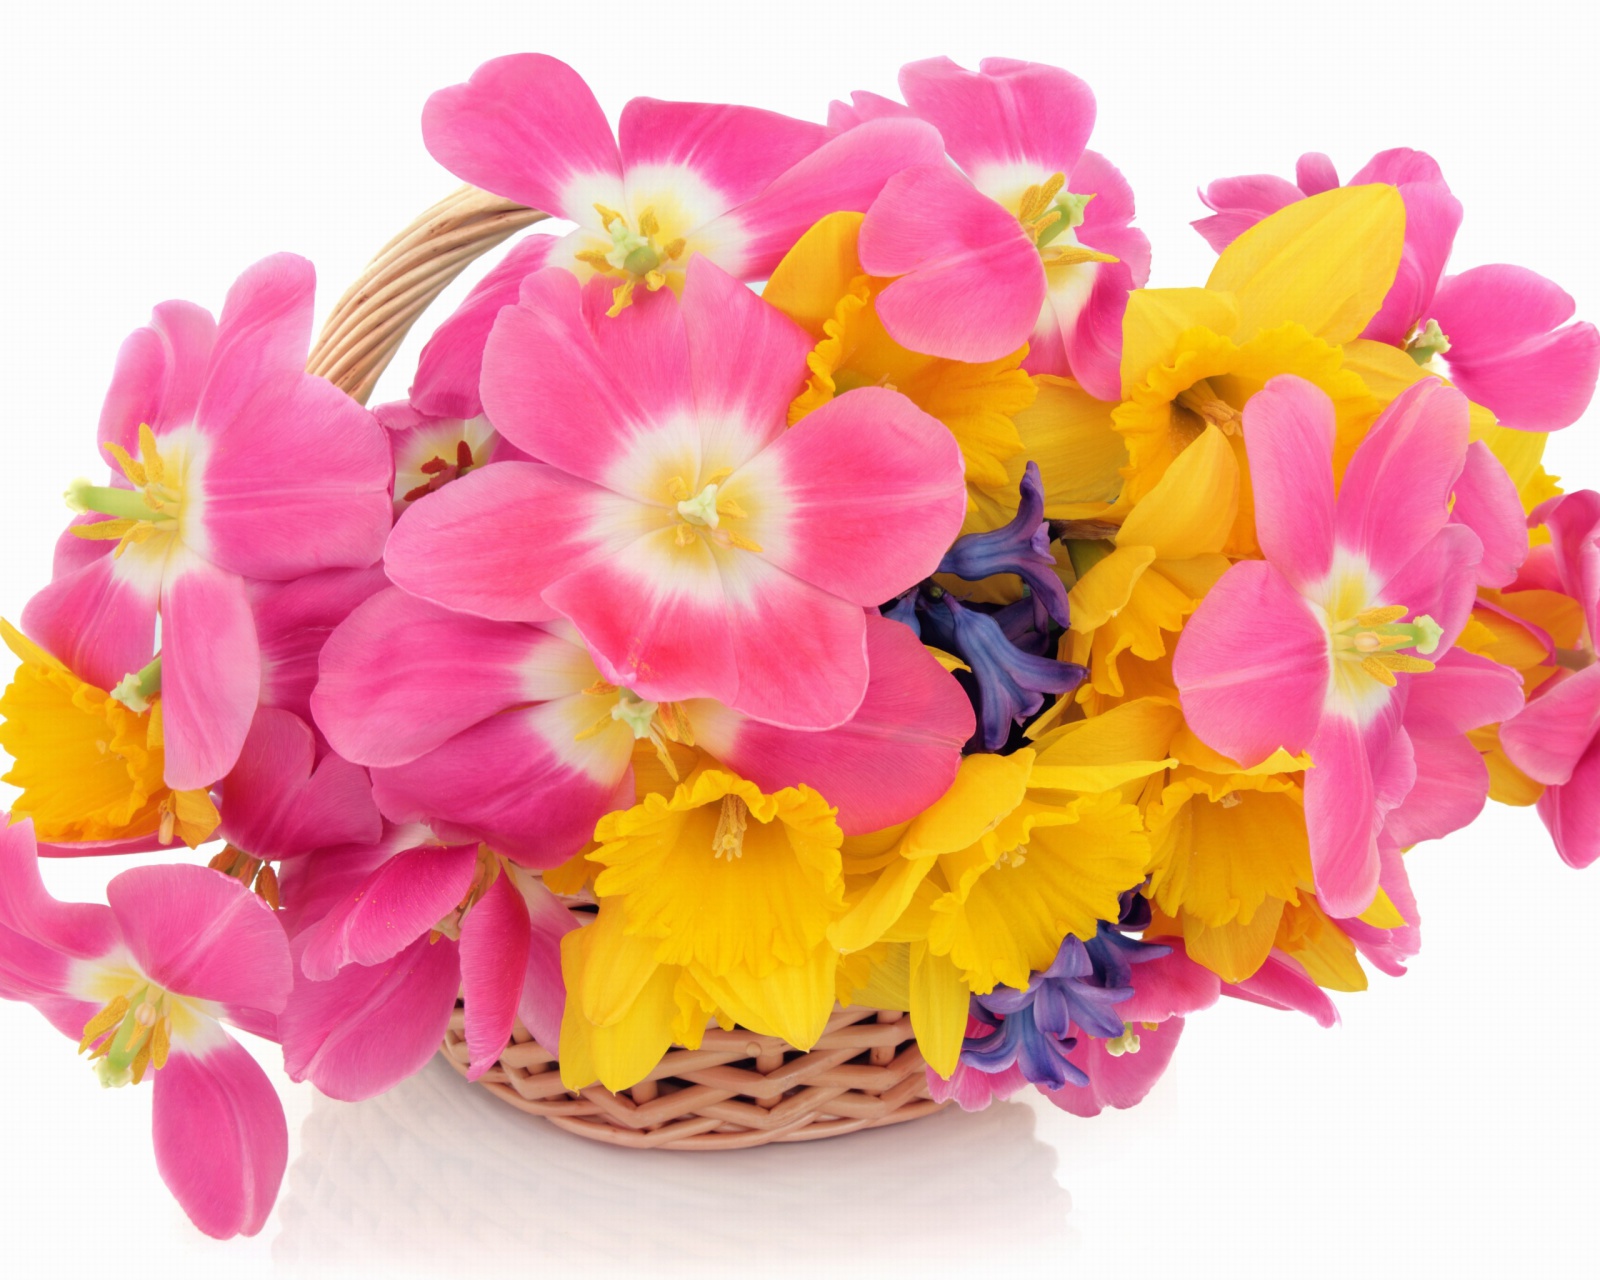 Indoor Basket of Tulips and Daffodils wallpaper 1600x1280